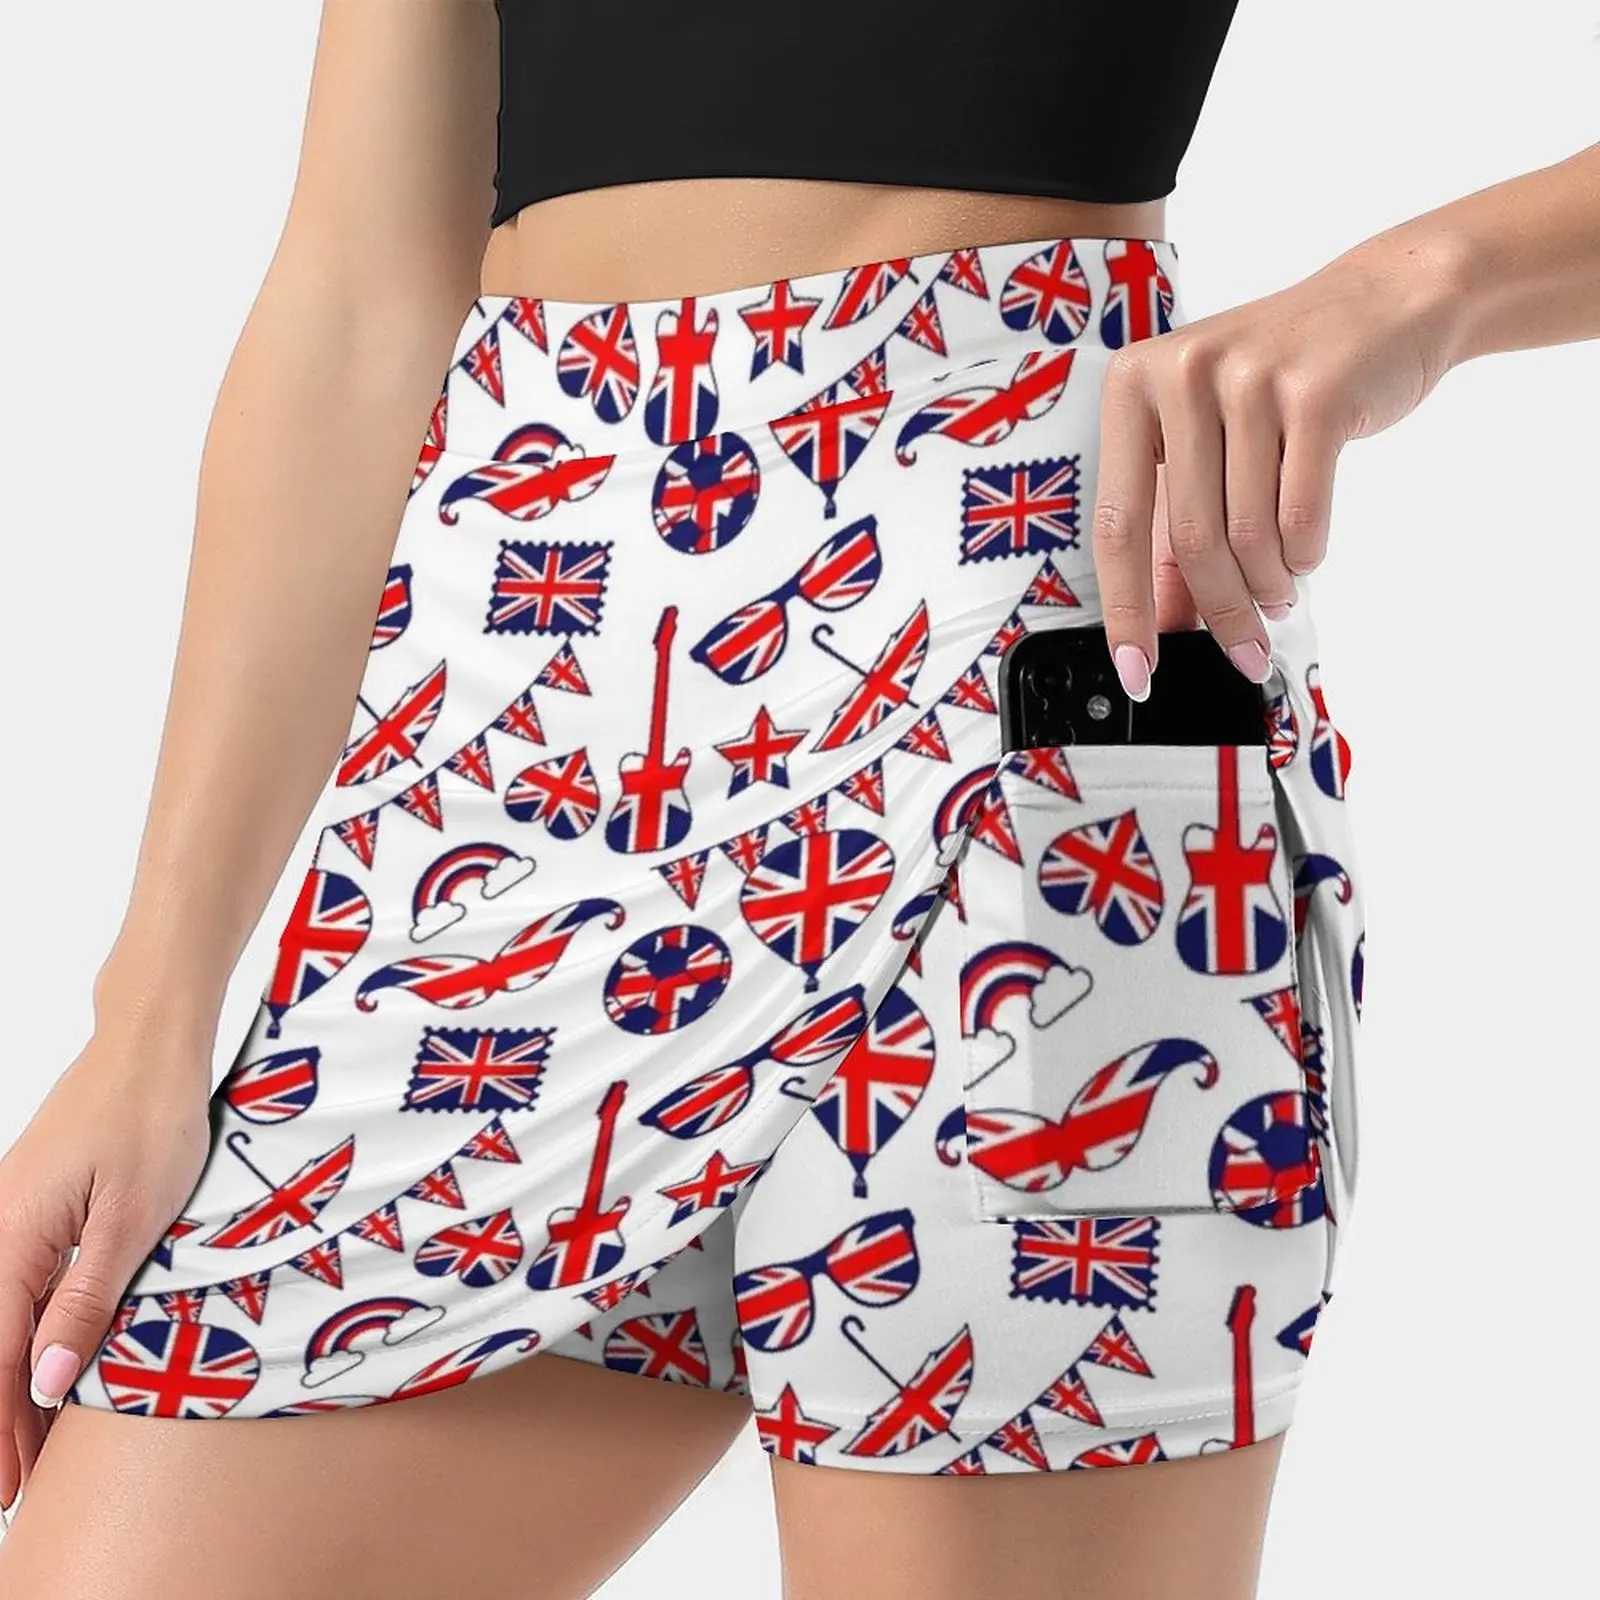 

Addicted To London Union Jack Icons Pattern Women's skirt With Hide Pocket Tennis Skirt Golf Skirts Badminton Skirts Running